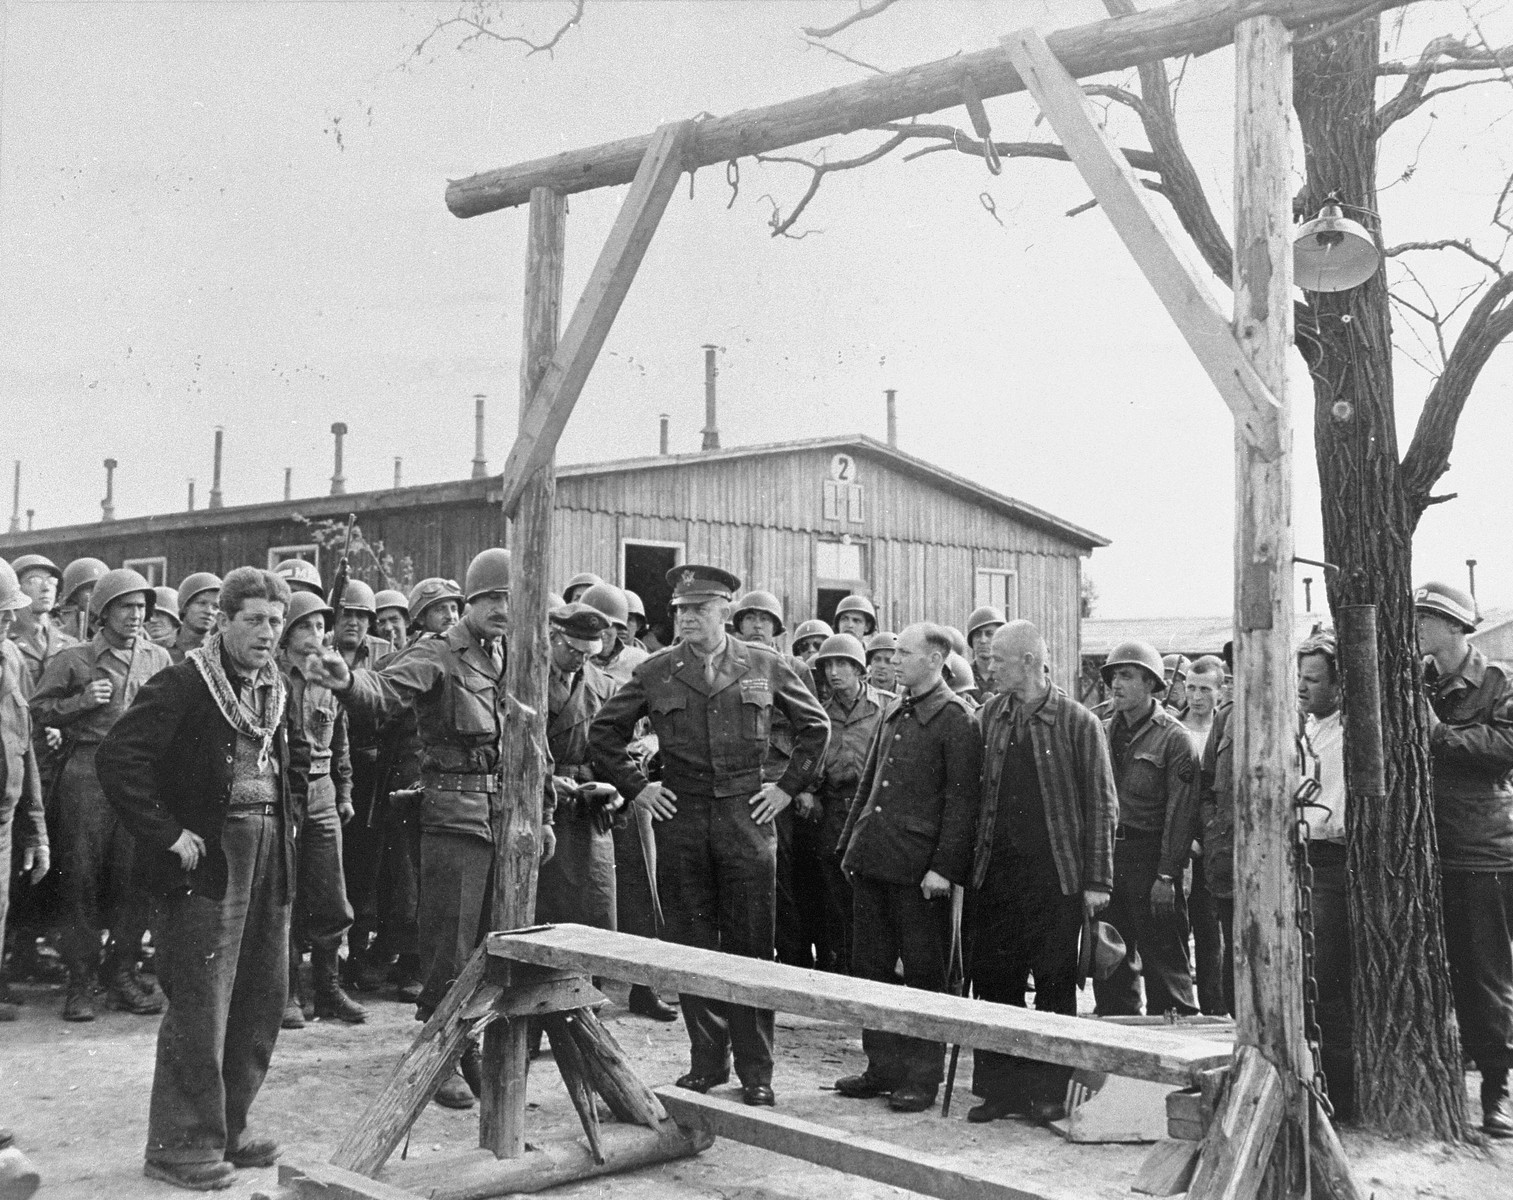 During an official tour of the newly liberated Ohrdruf concentration camp, an Austrian Jewish survivor describes to General Dwight Eisenhower and the members of his entourage the use of the gallows in the camp.

Among those pictured is Jules Grad, correspondent for the U.S. Army newspaper "Stars and Stripes" (on the right).